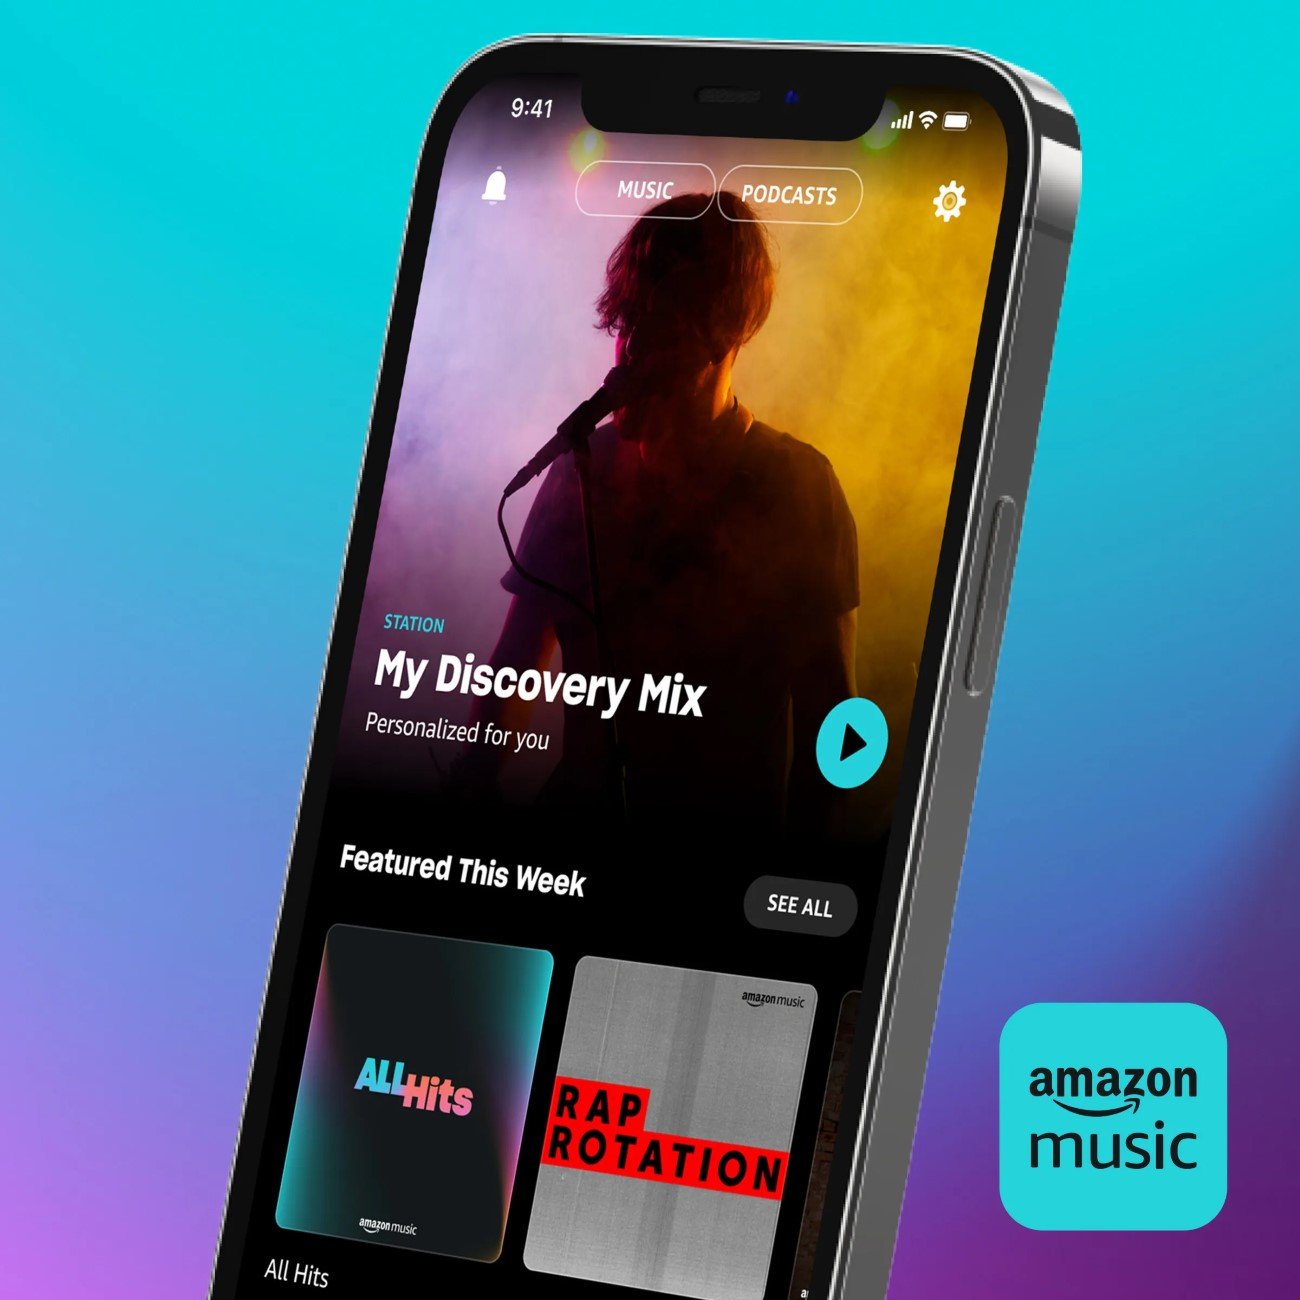 Amazon Prime Music extended